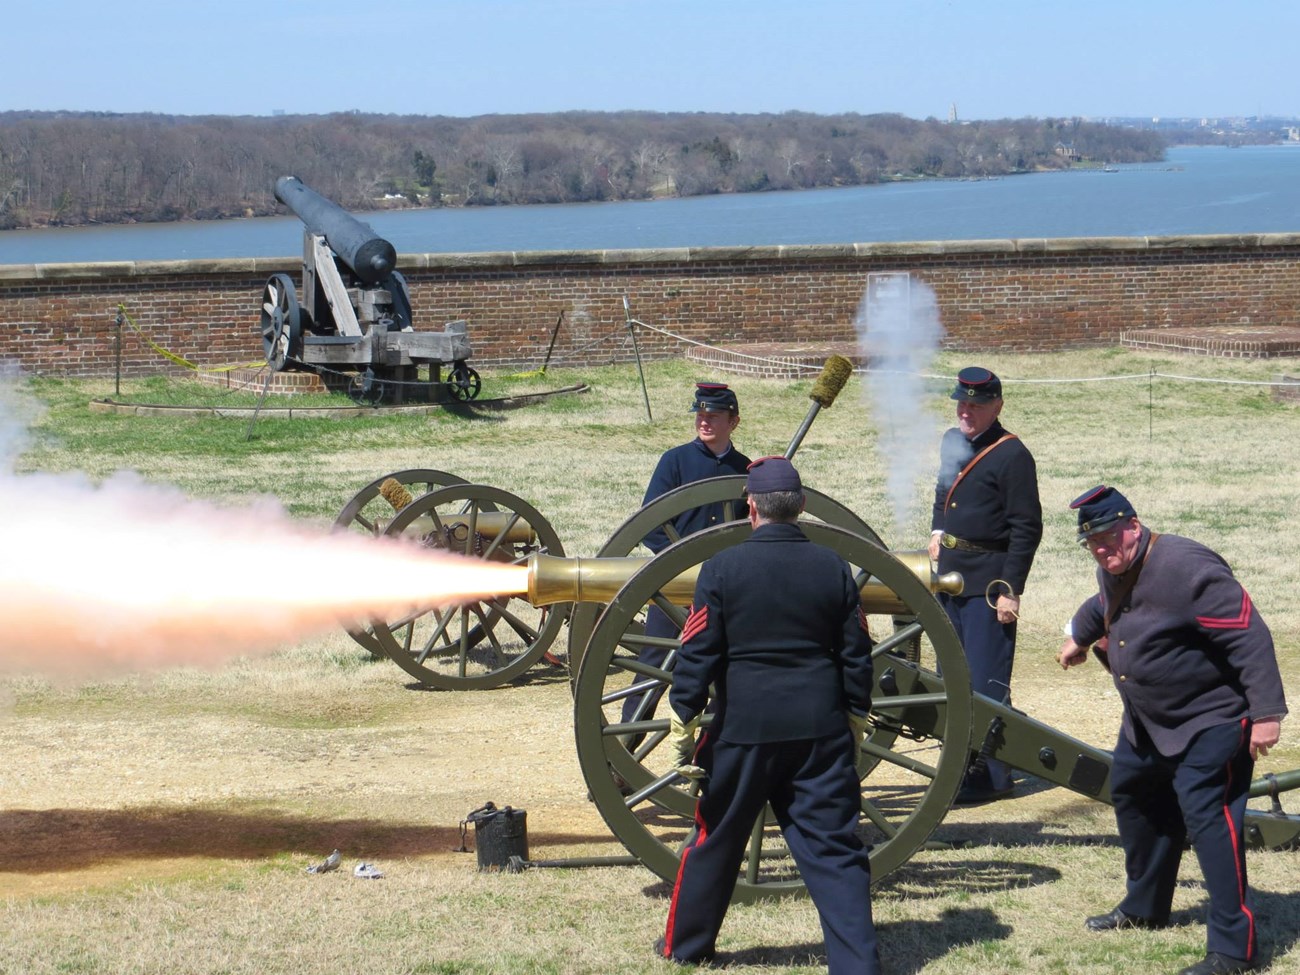 Park staff and volunteers in Civil War uniforms firing a cannon.